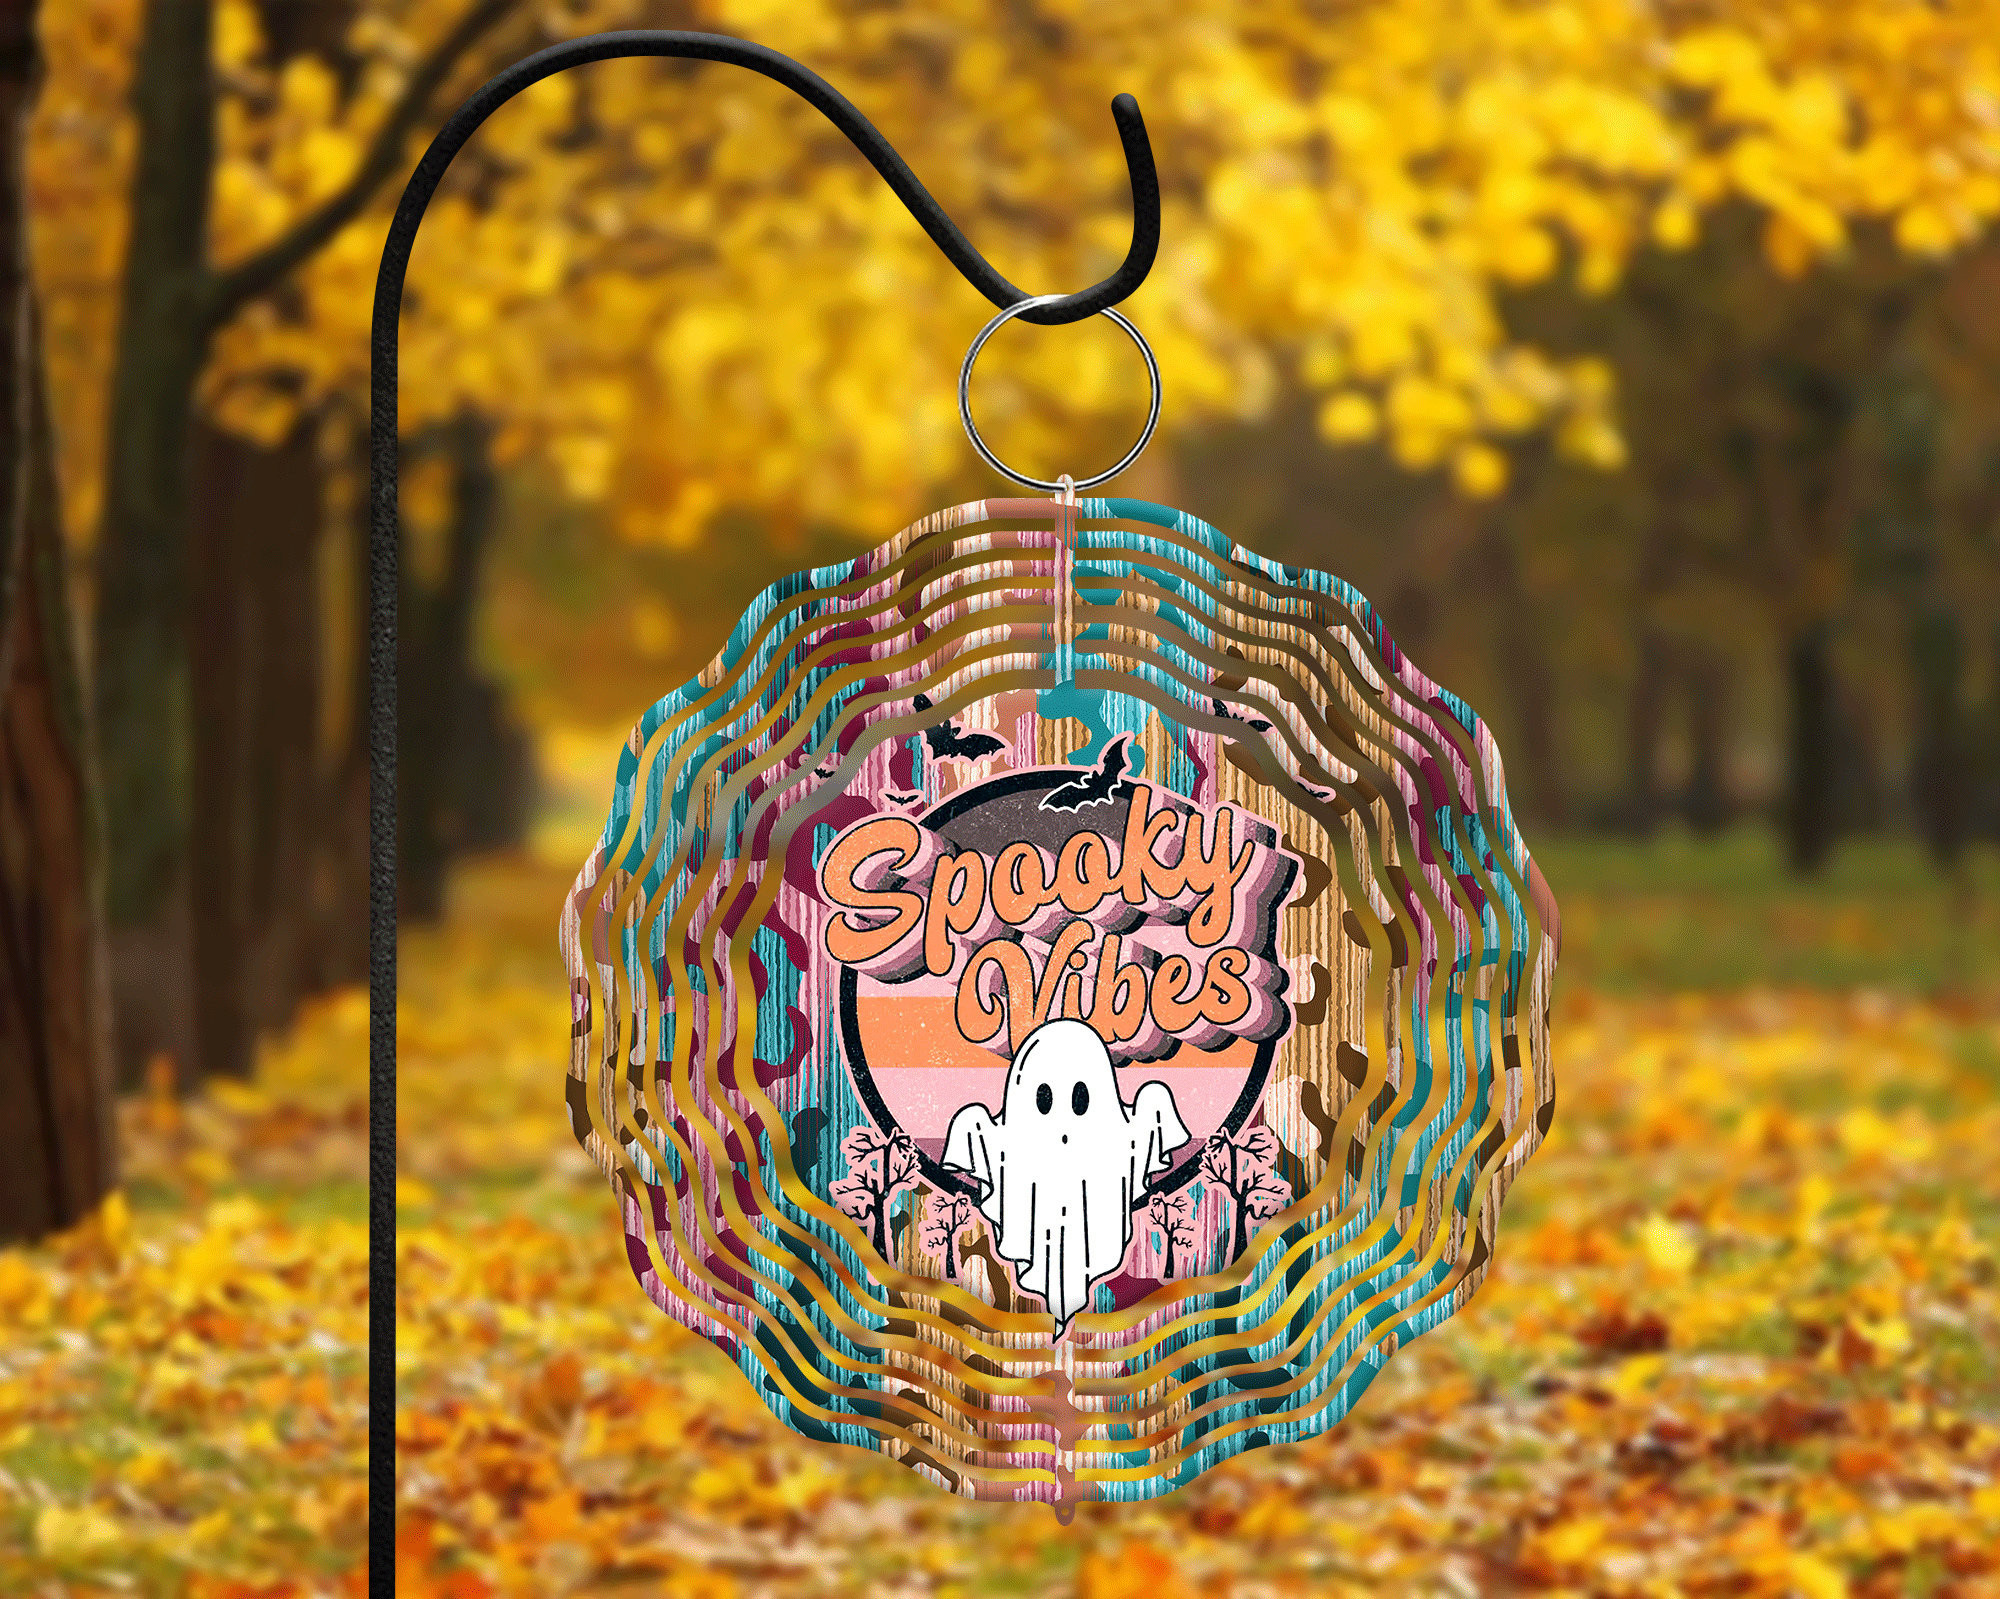 Spooky Vibes Wind Spinner For Yard And Garden, Outdoor Garden Yard Decoration, Garden Decor, Chime Art Gift